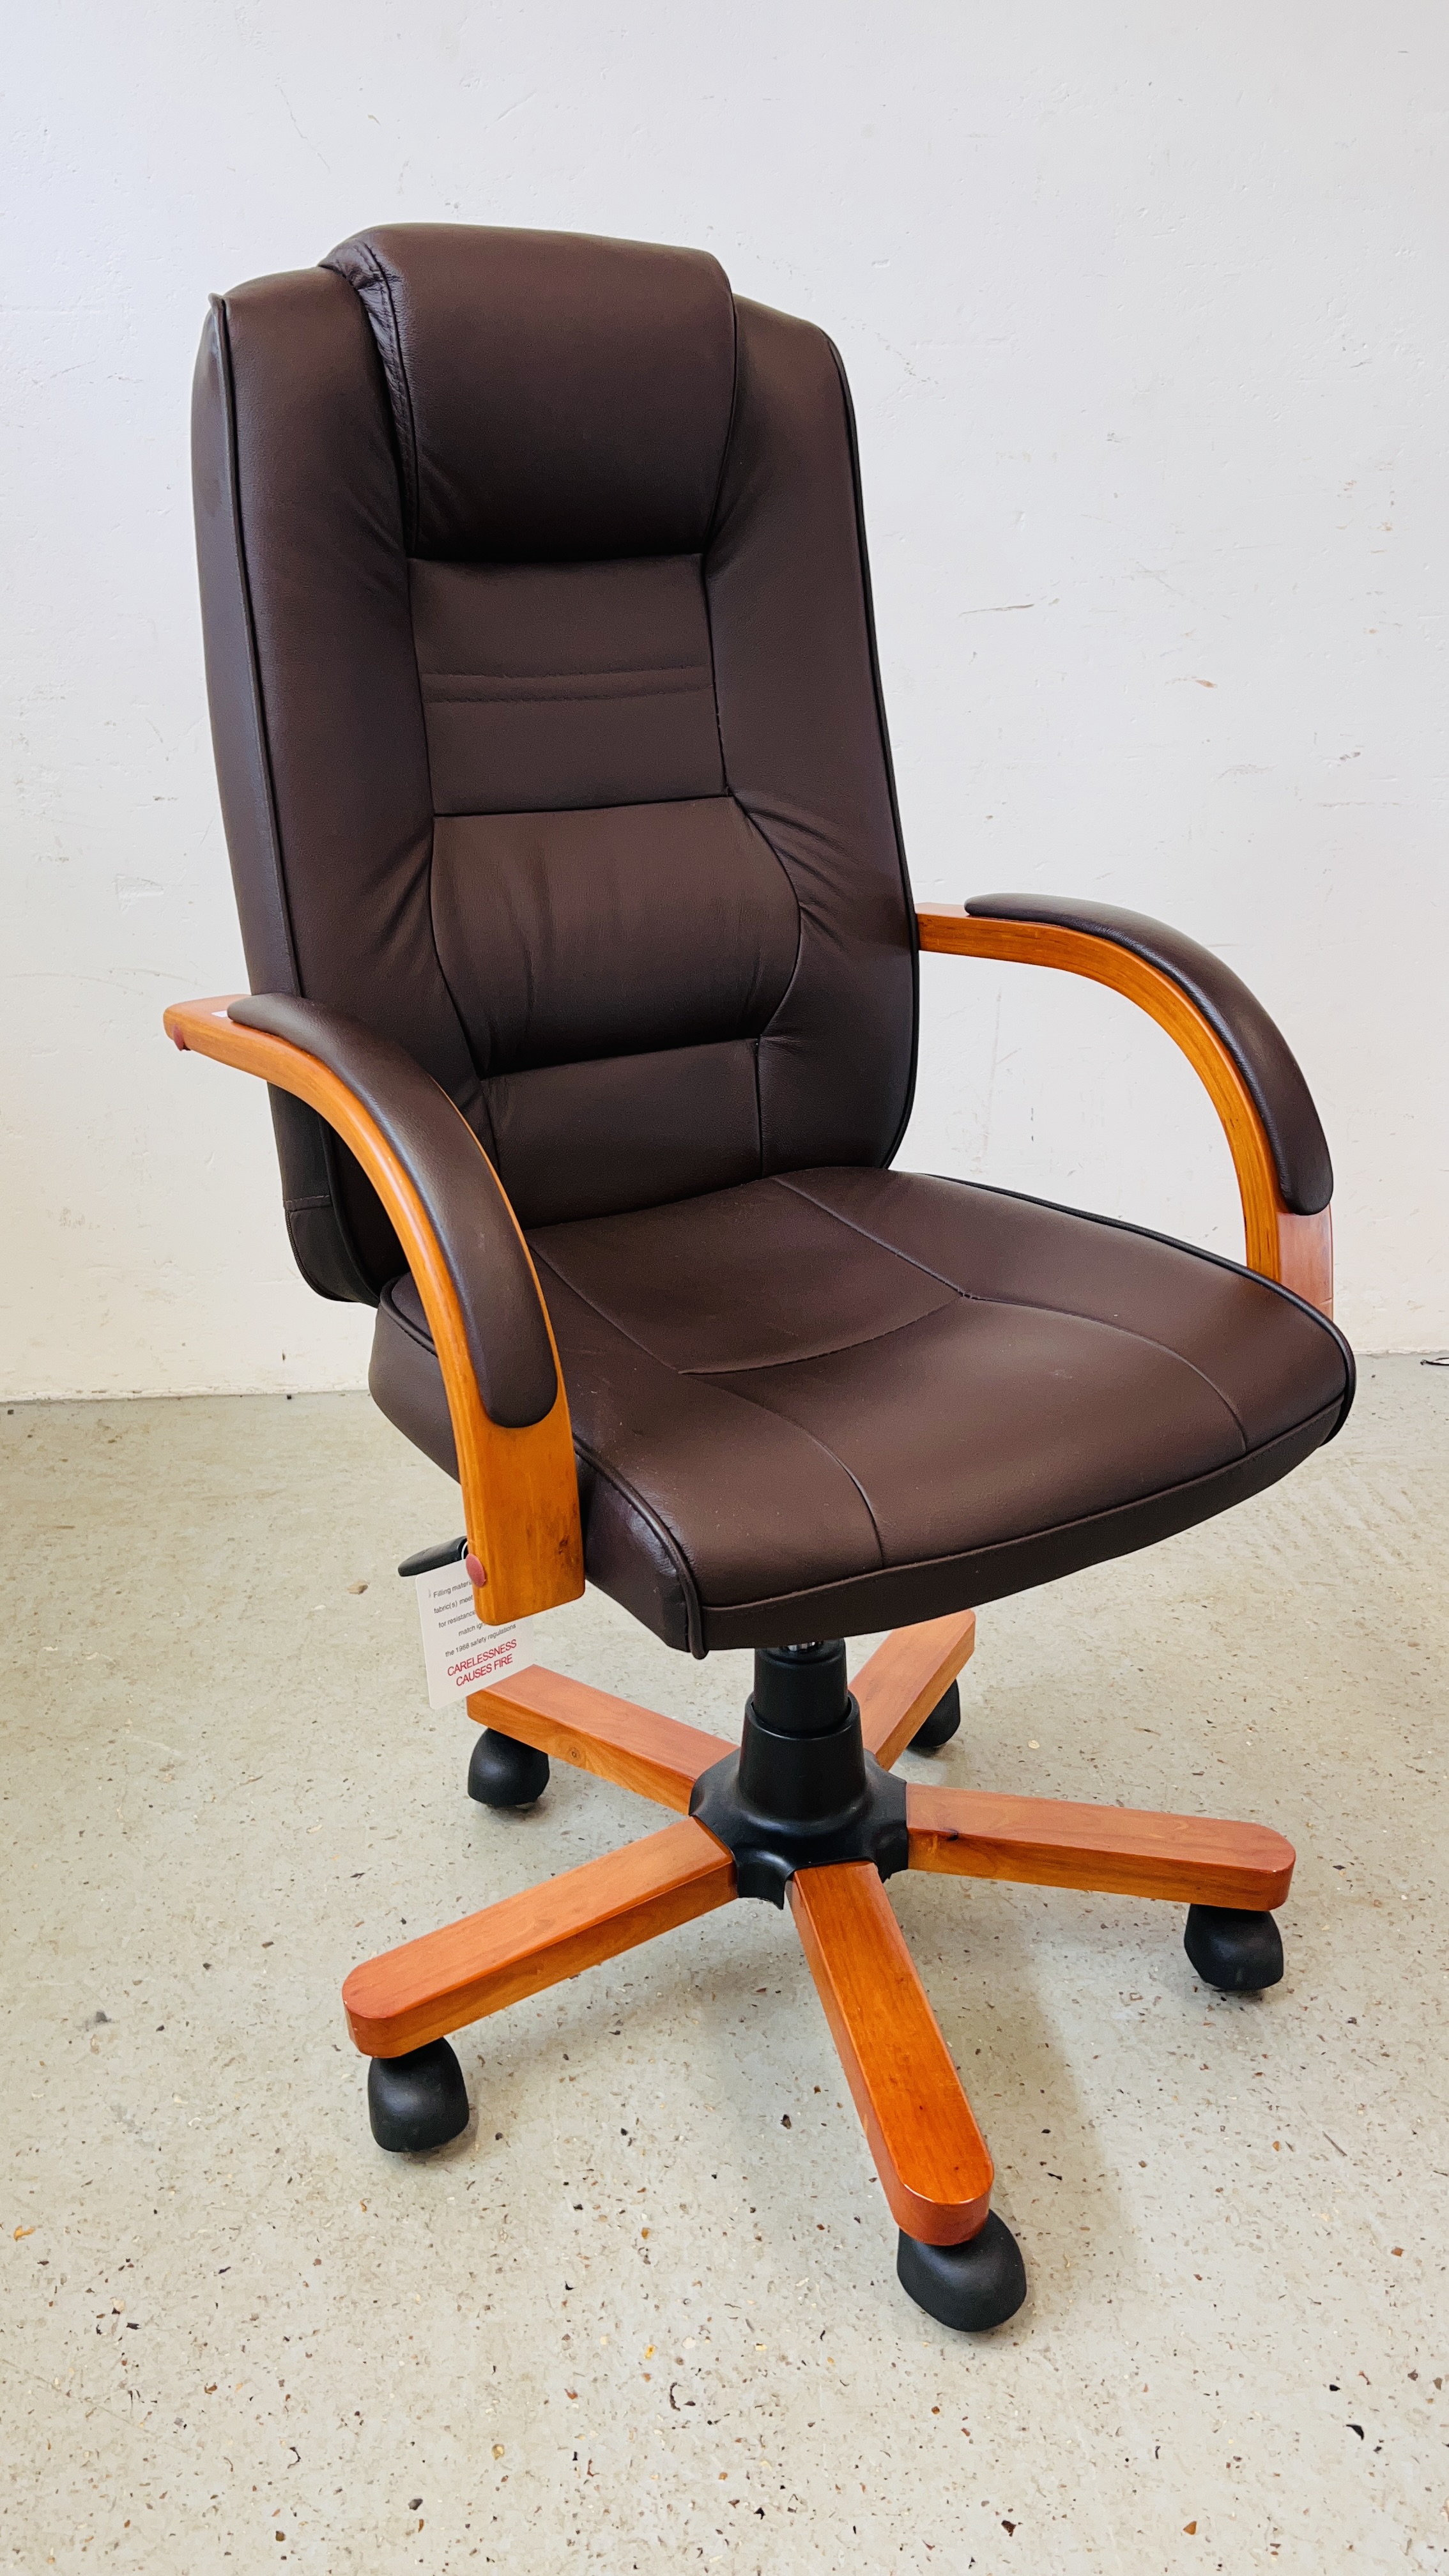 A GOOD QUALITY EXECUTIVE HOME OFFICE CHAIR - Image 7 of 7